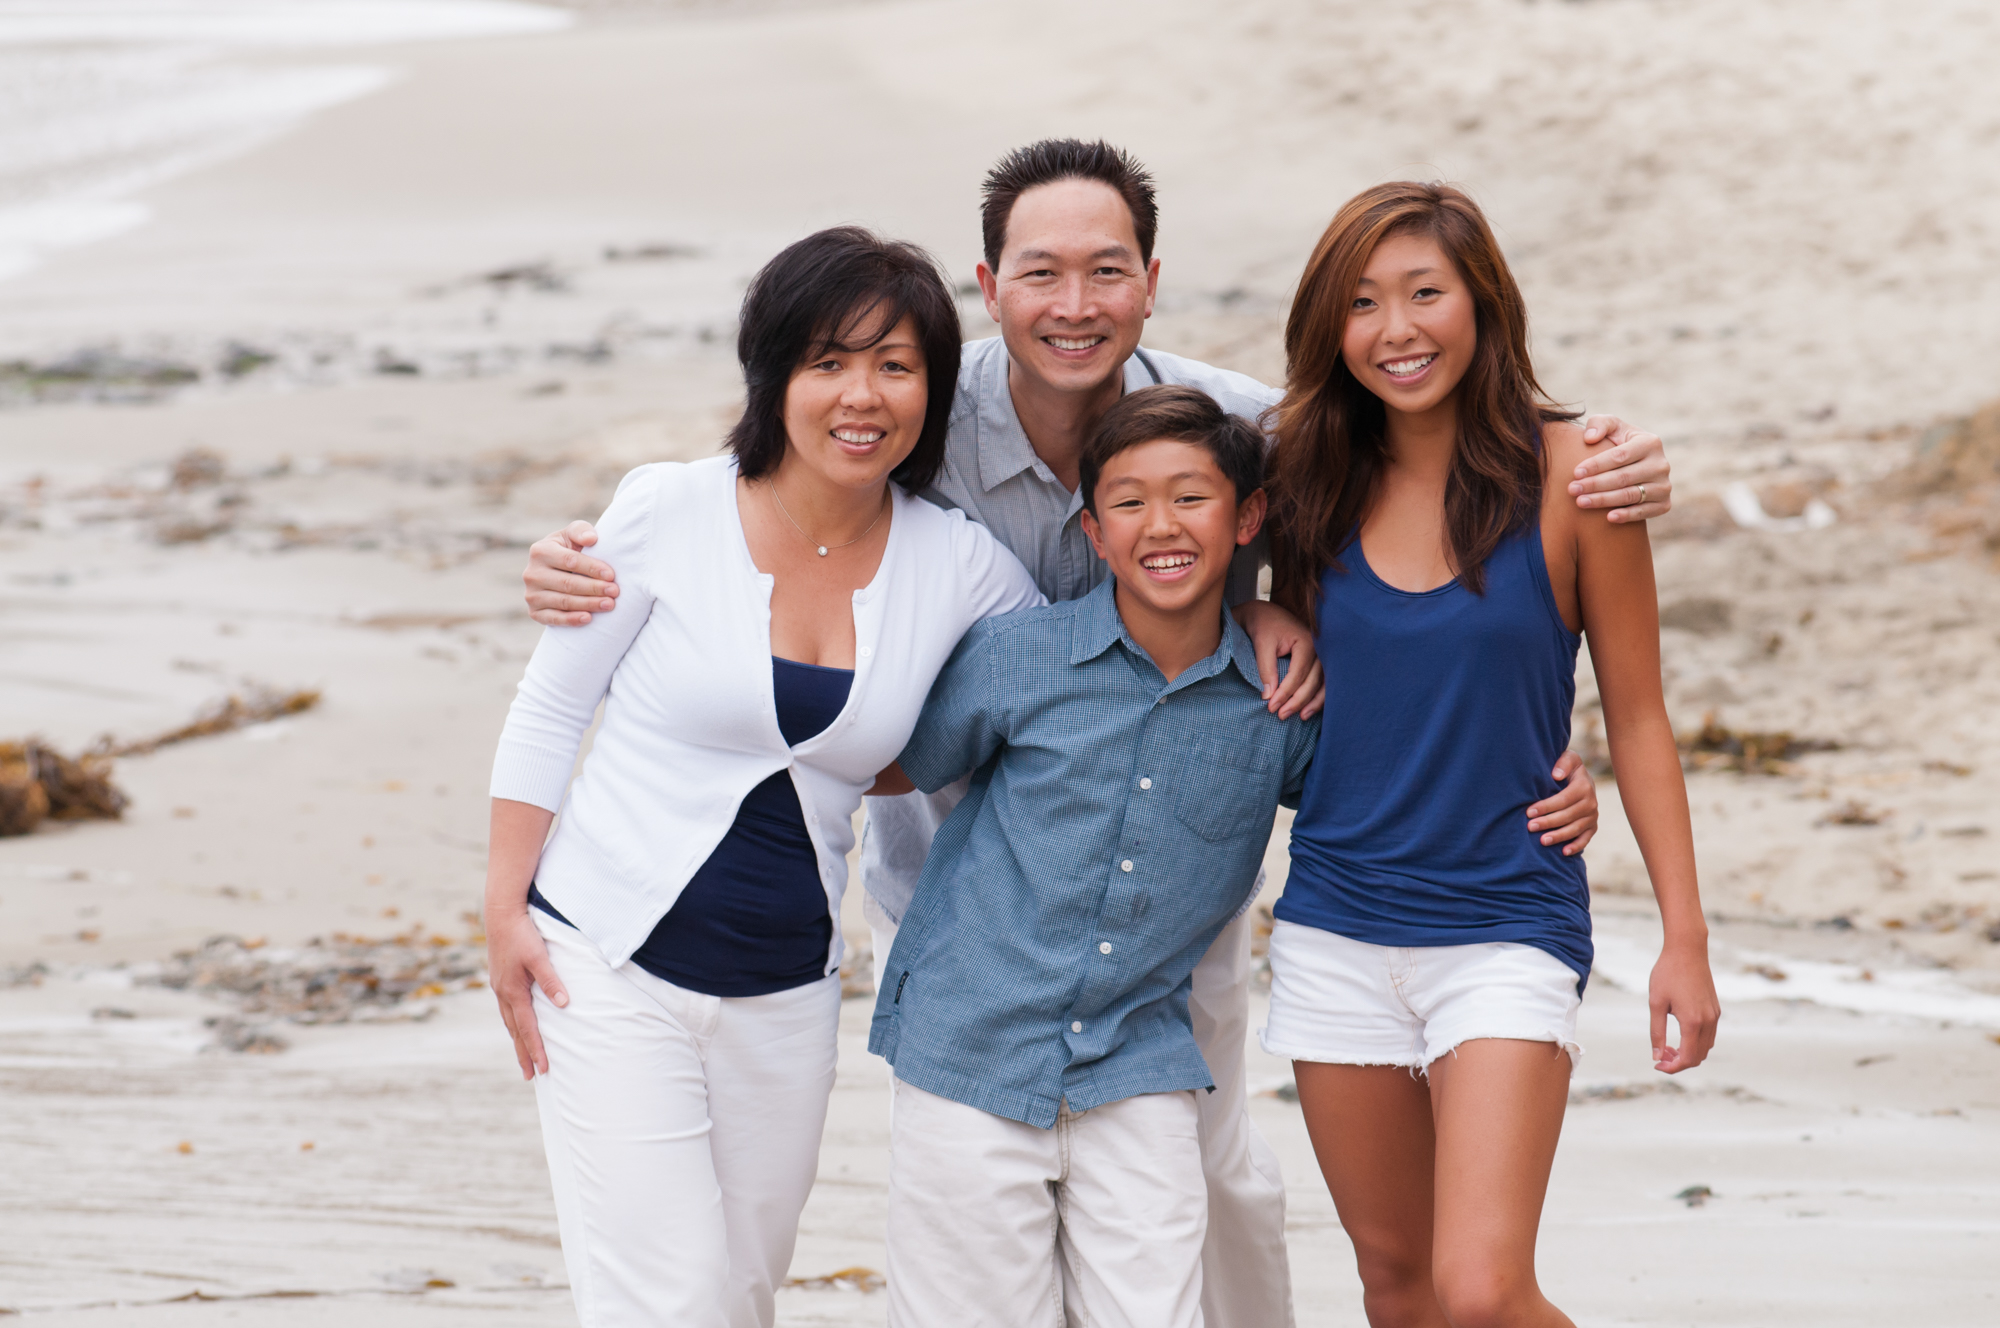 This photograph features an Asian family having casual family photos on the beach near The Montage Hotel in Laguna Beach. The family is wearing color coordinated outfits.